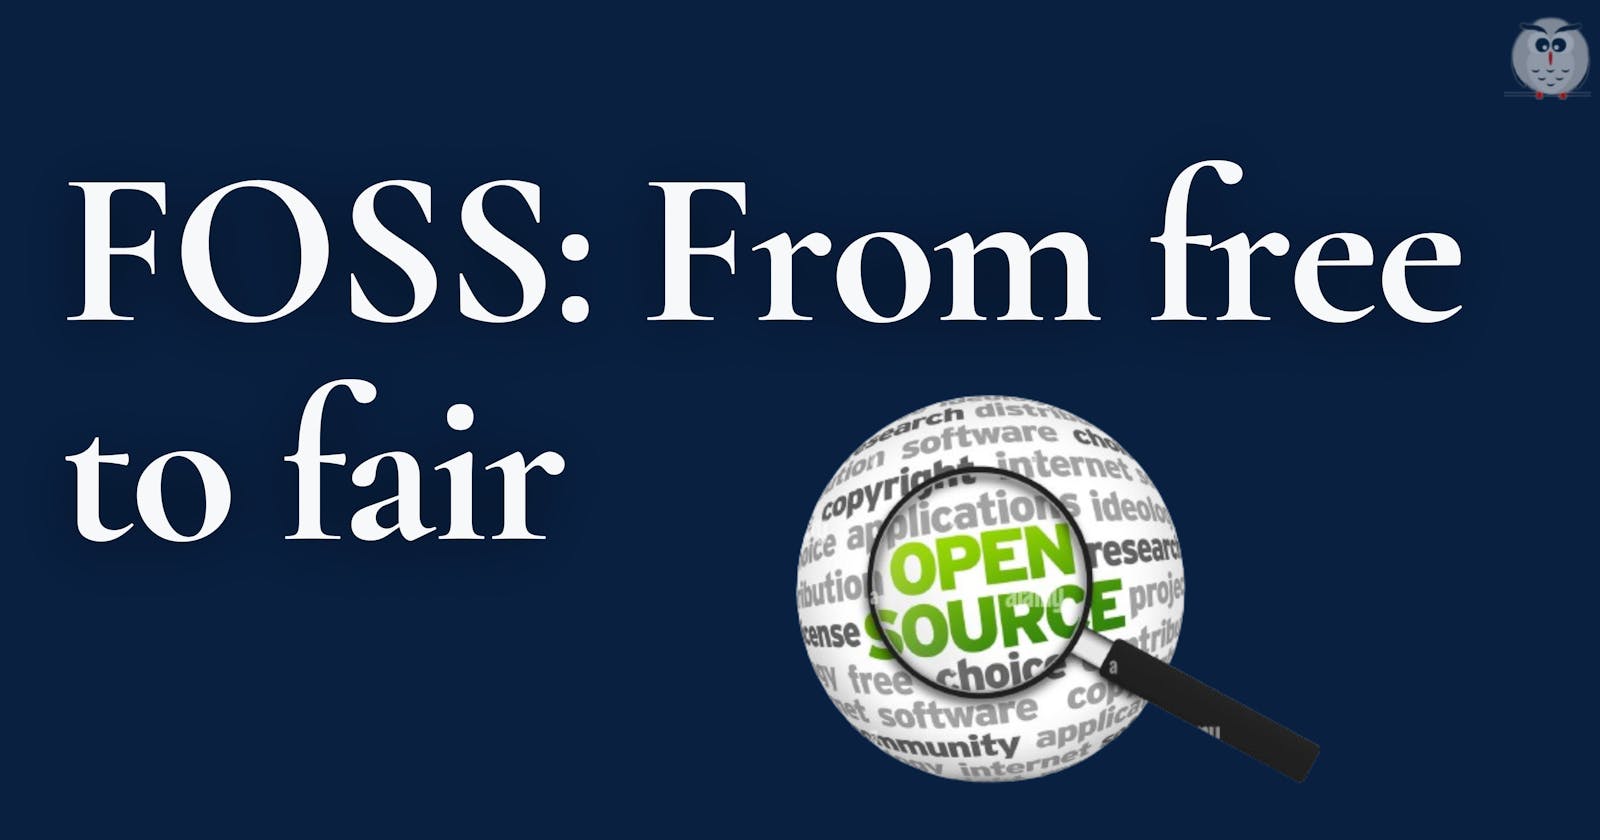 Cover Image for FOSS: from Free to Fair